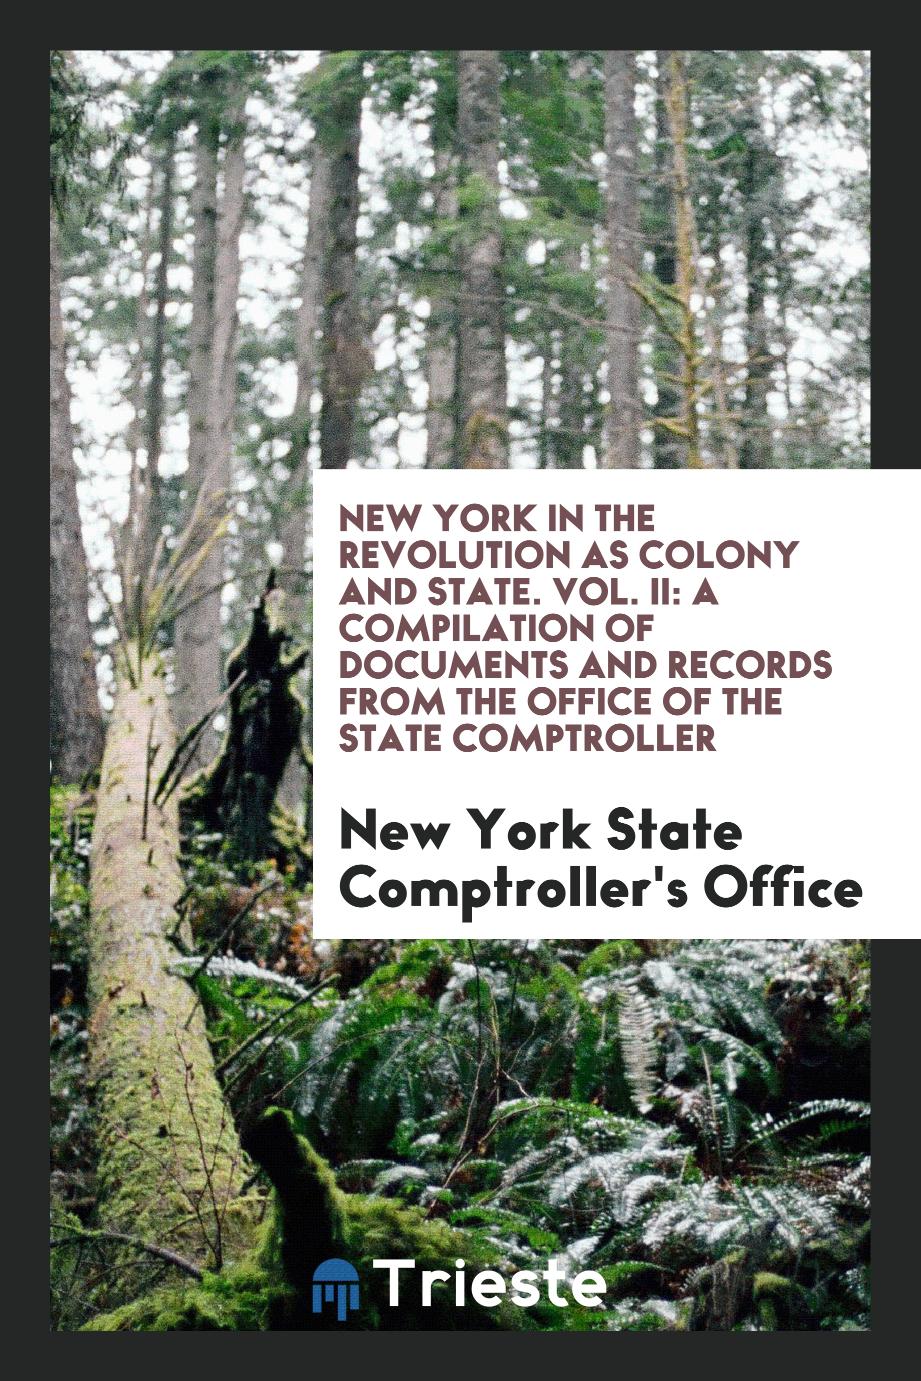 New York in the Revolution as Colony and State. Vol. II: A Compilation of Documents and Records from the Office of the State Comptroller